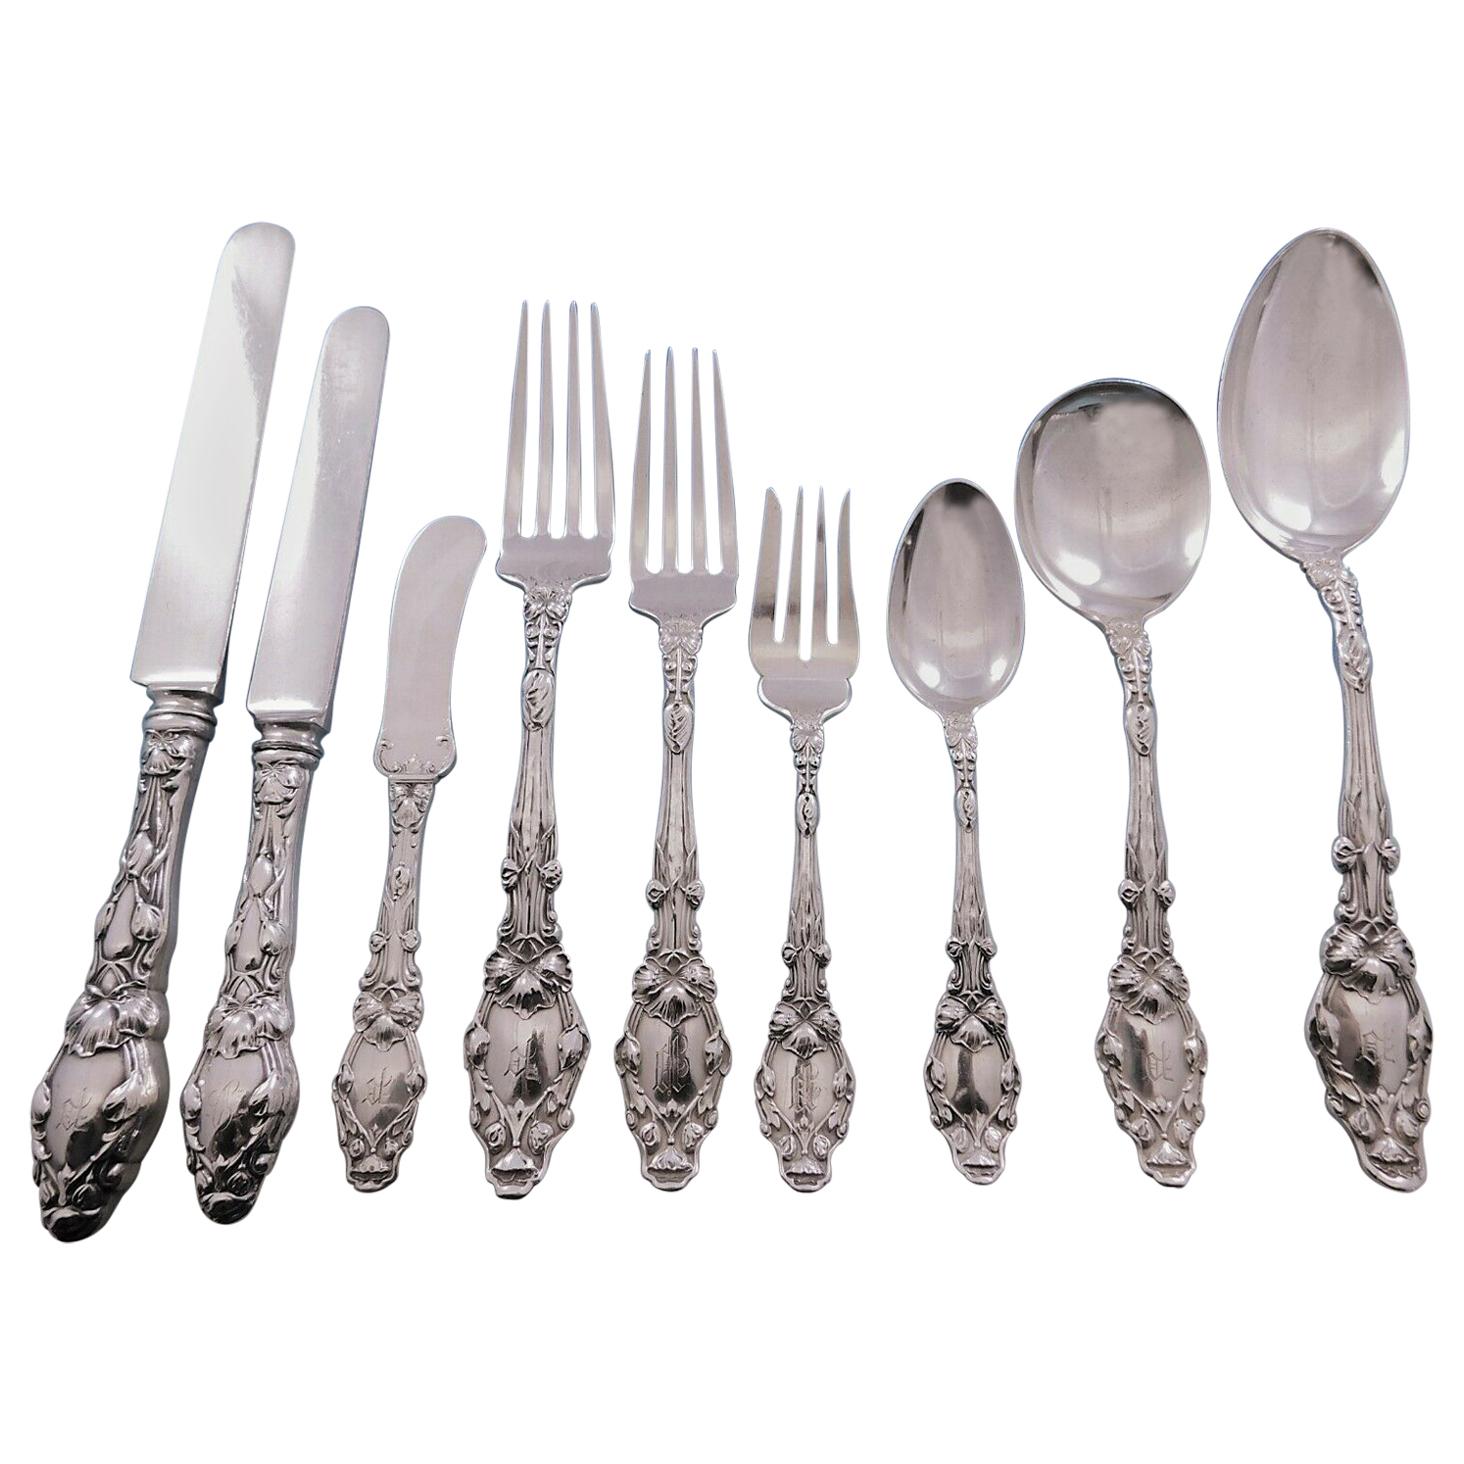 Virginiana by Gorham Sterling Silver Flatware Set for 6 Service 57 Pieces Dinner